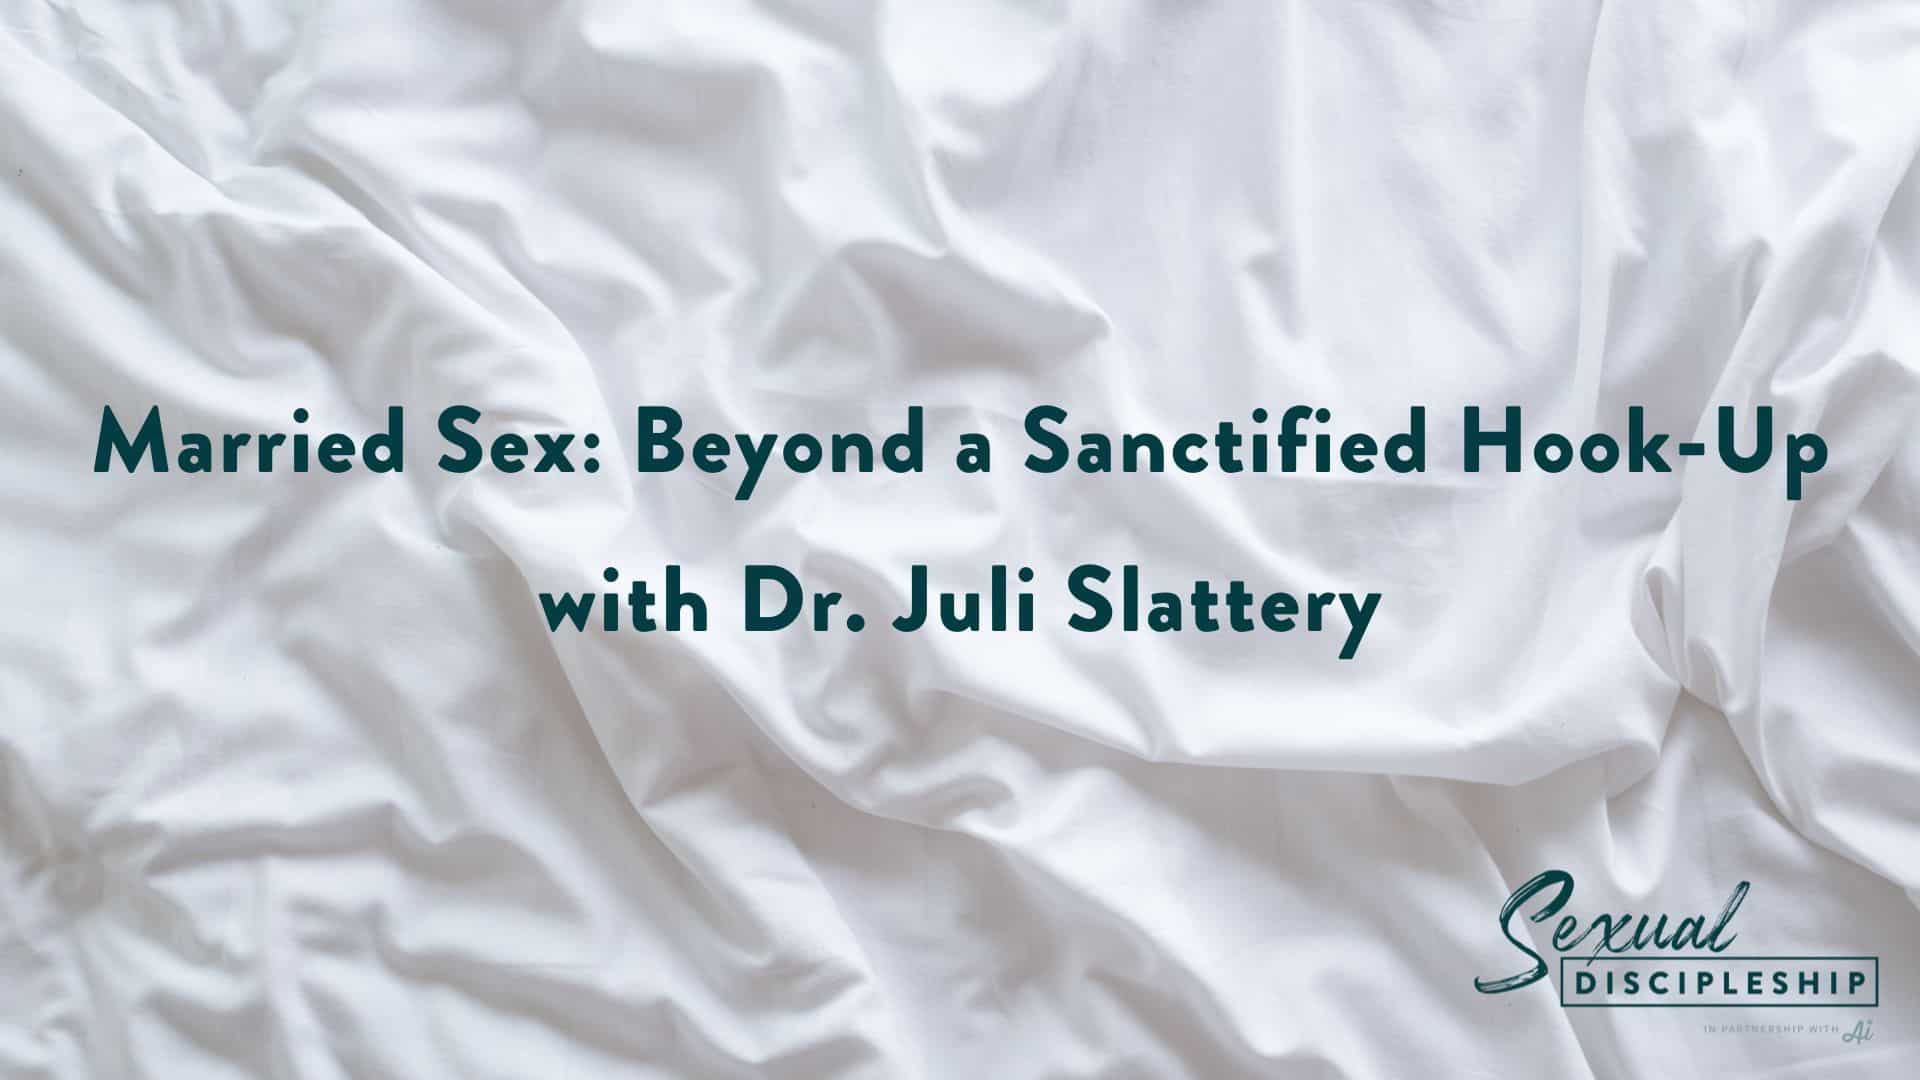 Married Sex Beyond a Sanctified Hook-Up pic